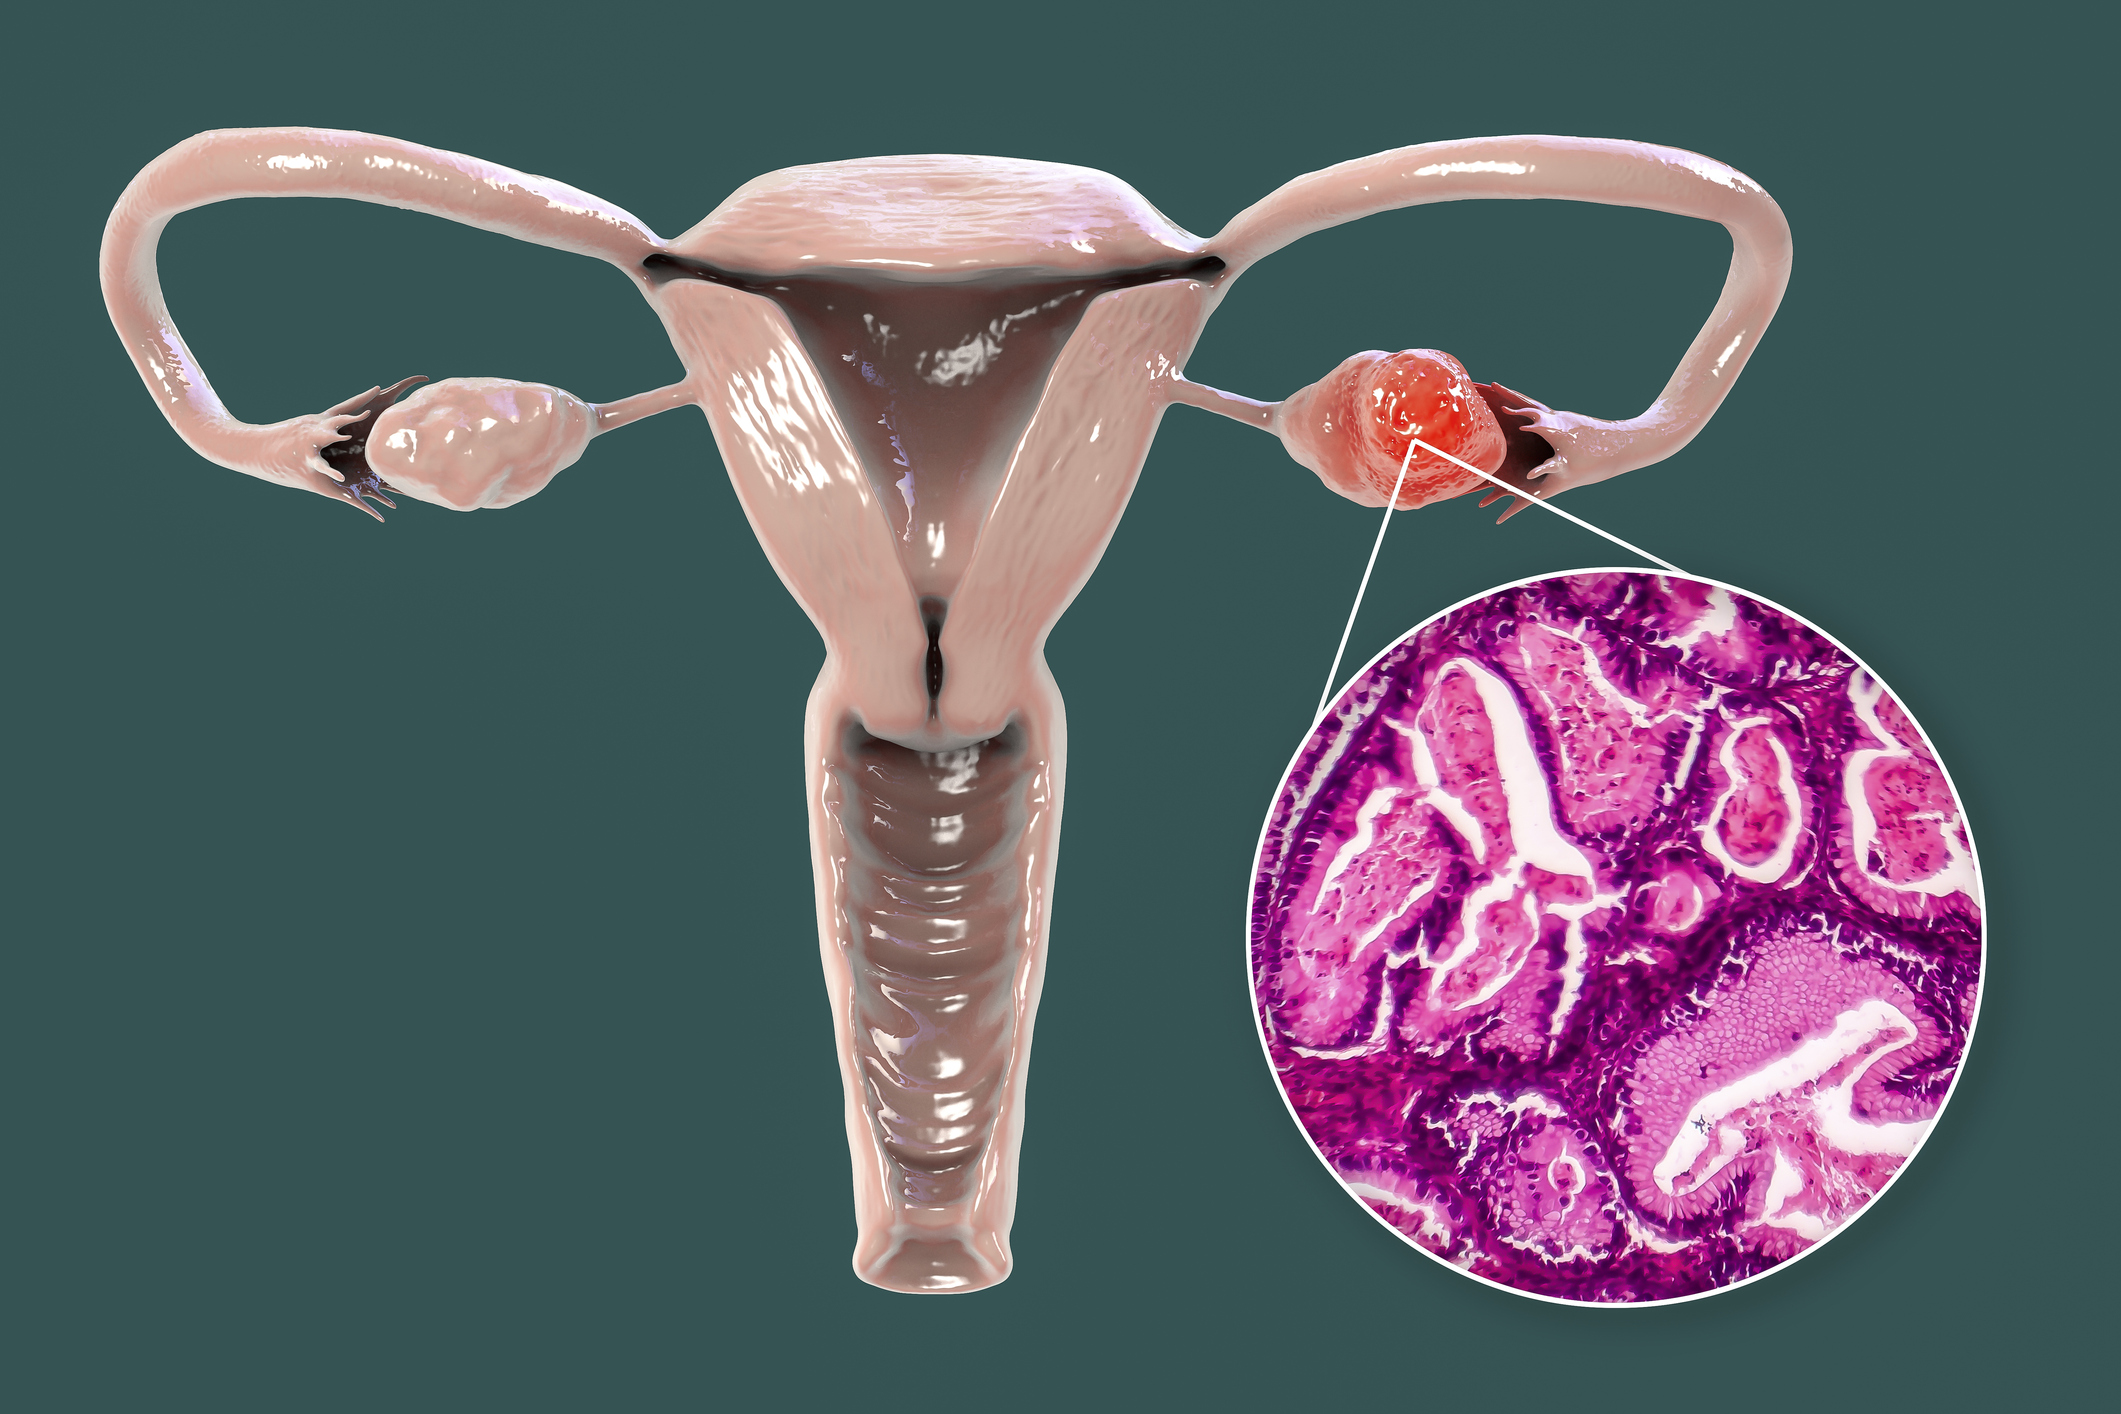 Distinct Ovarian Cancer Evolution States May Offer Personalized Treatment Options